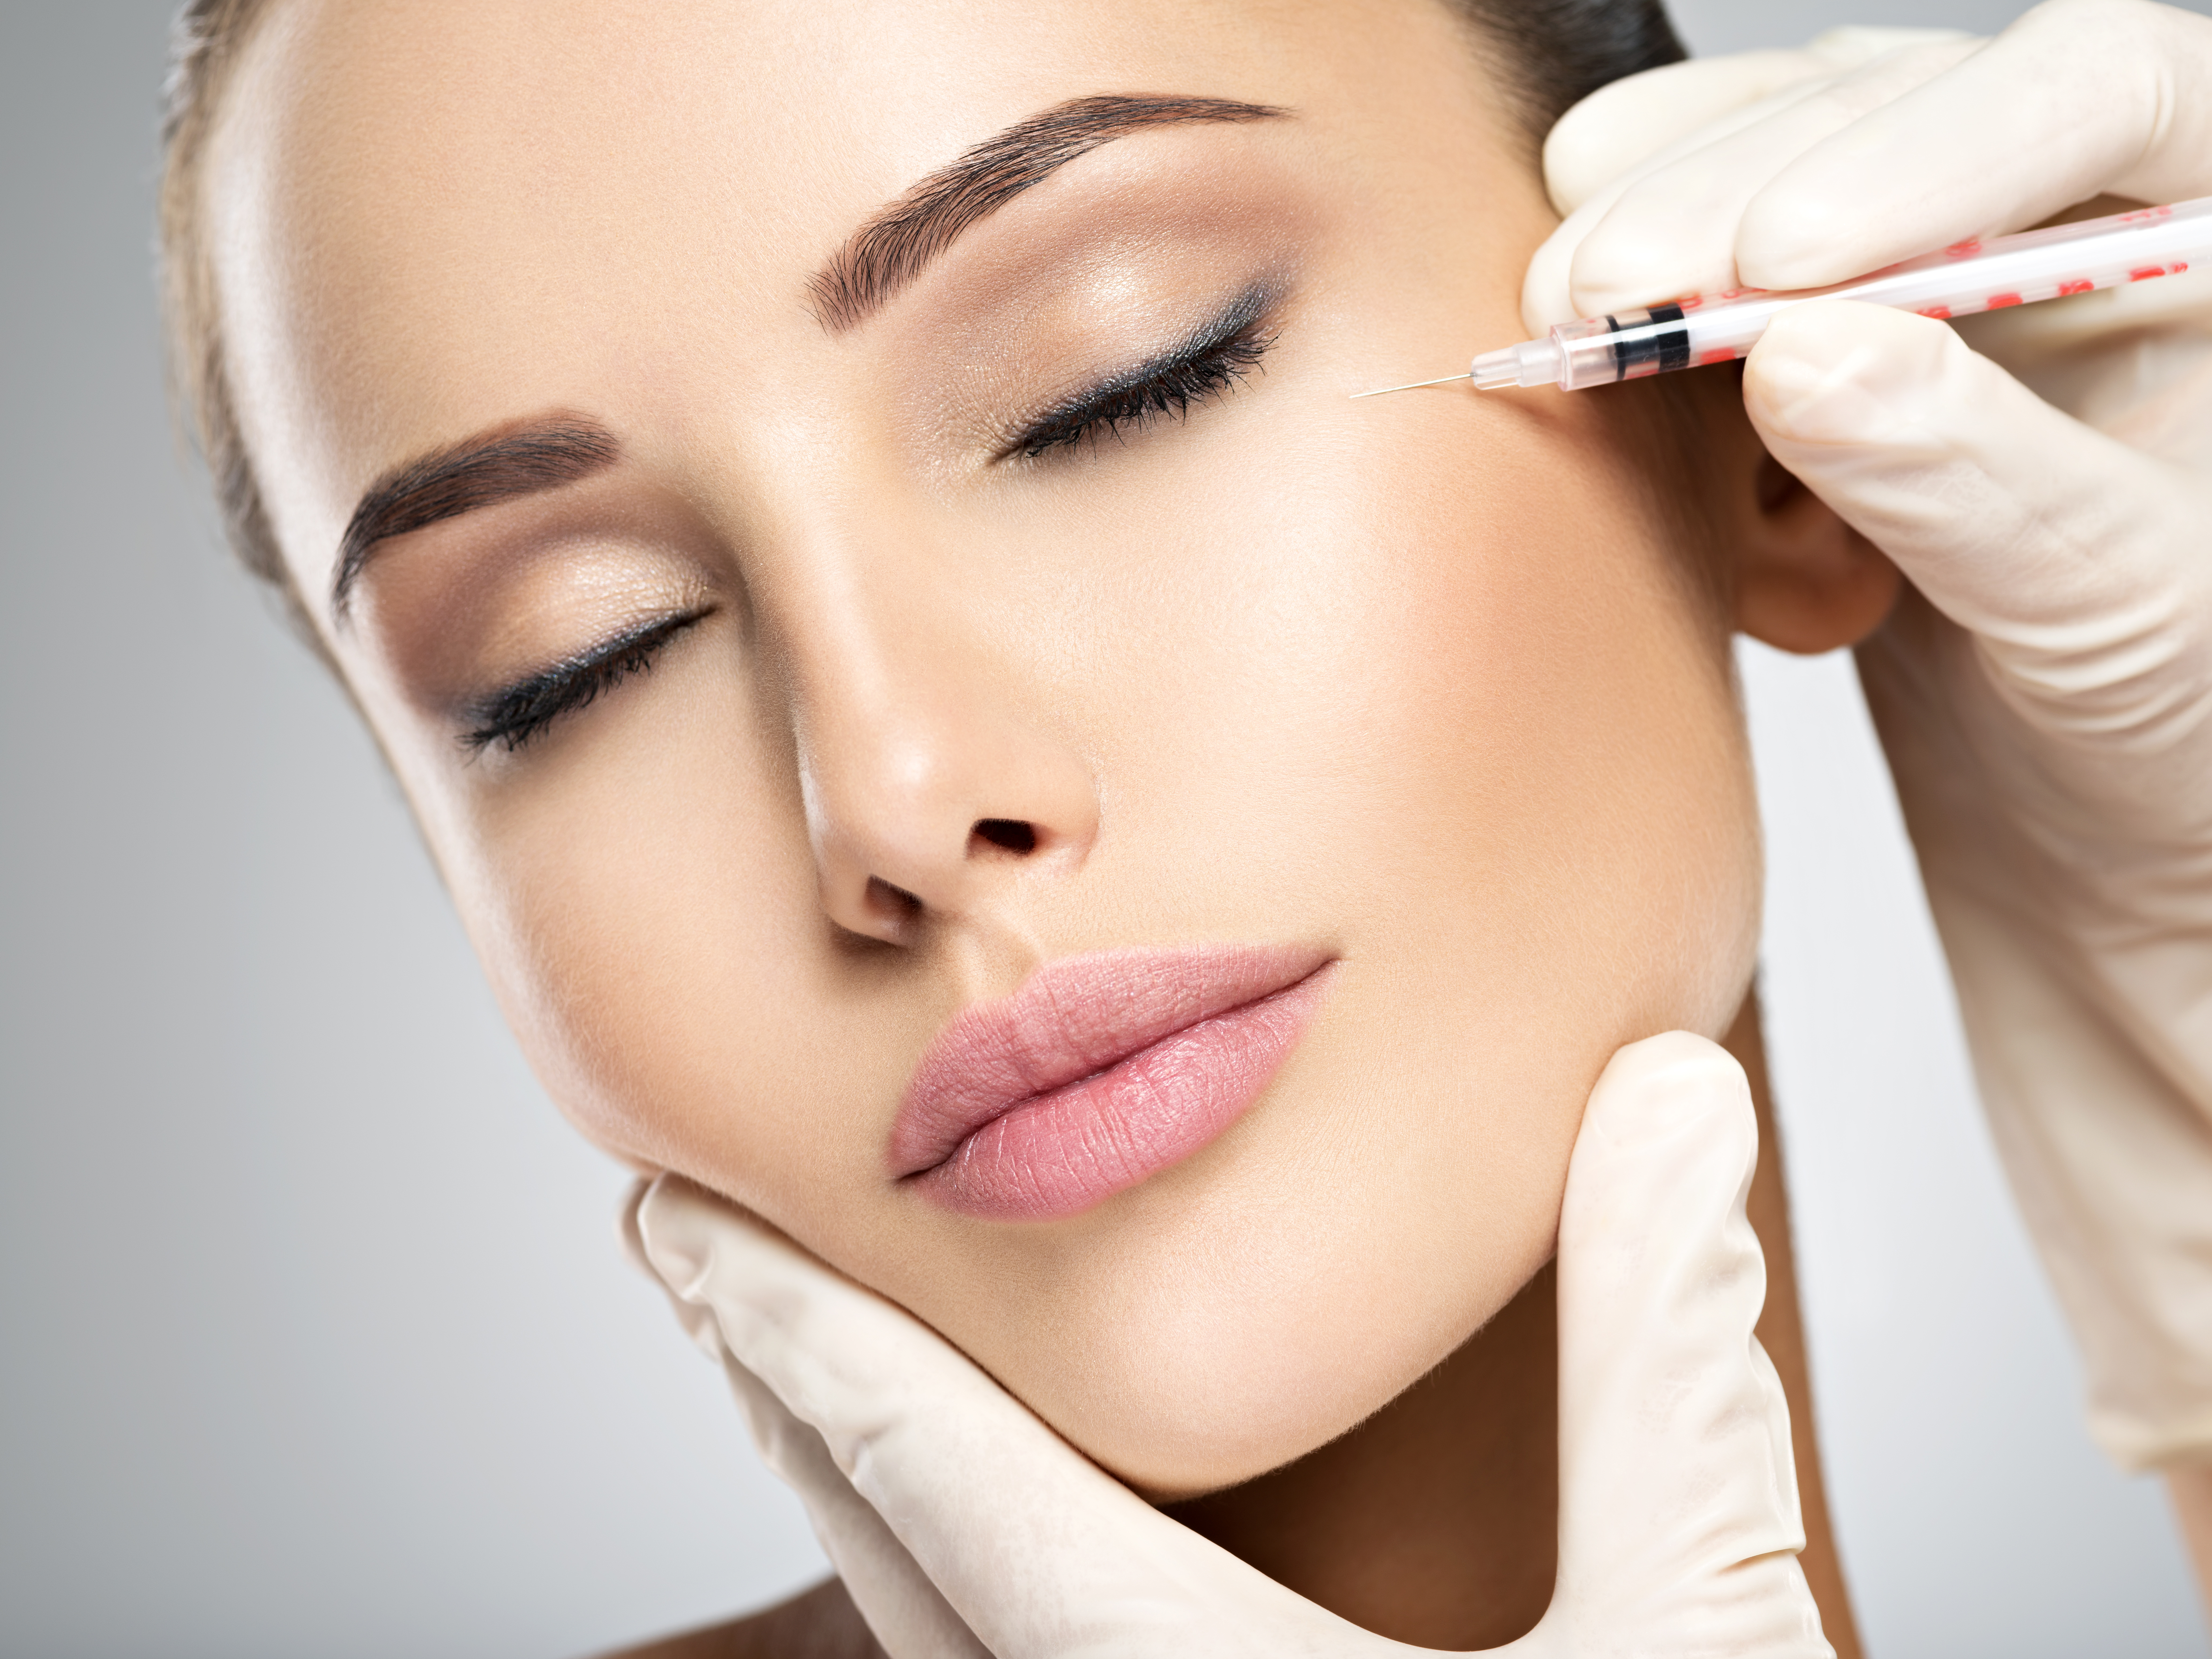 Woman getting cosmetic injection of botox near eyes